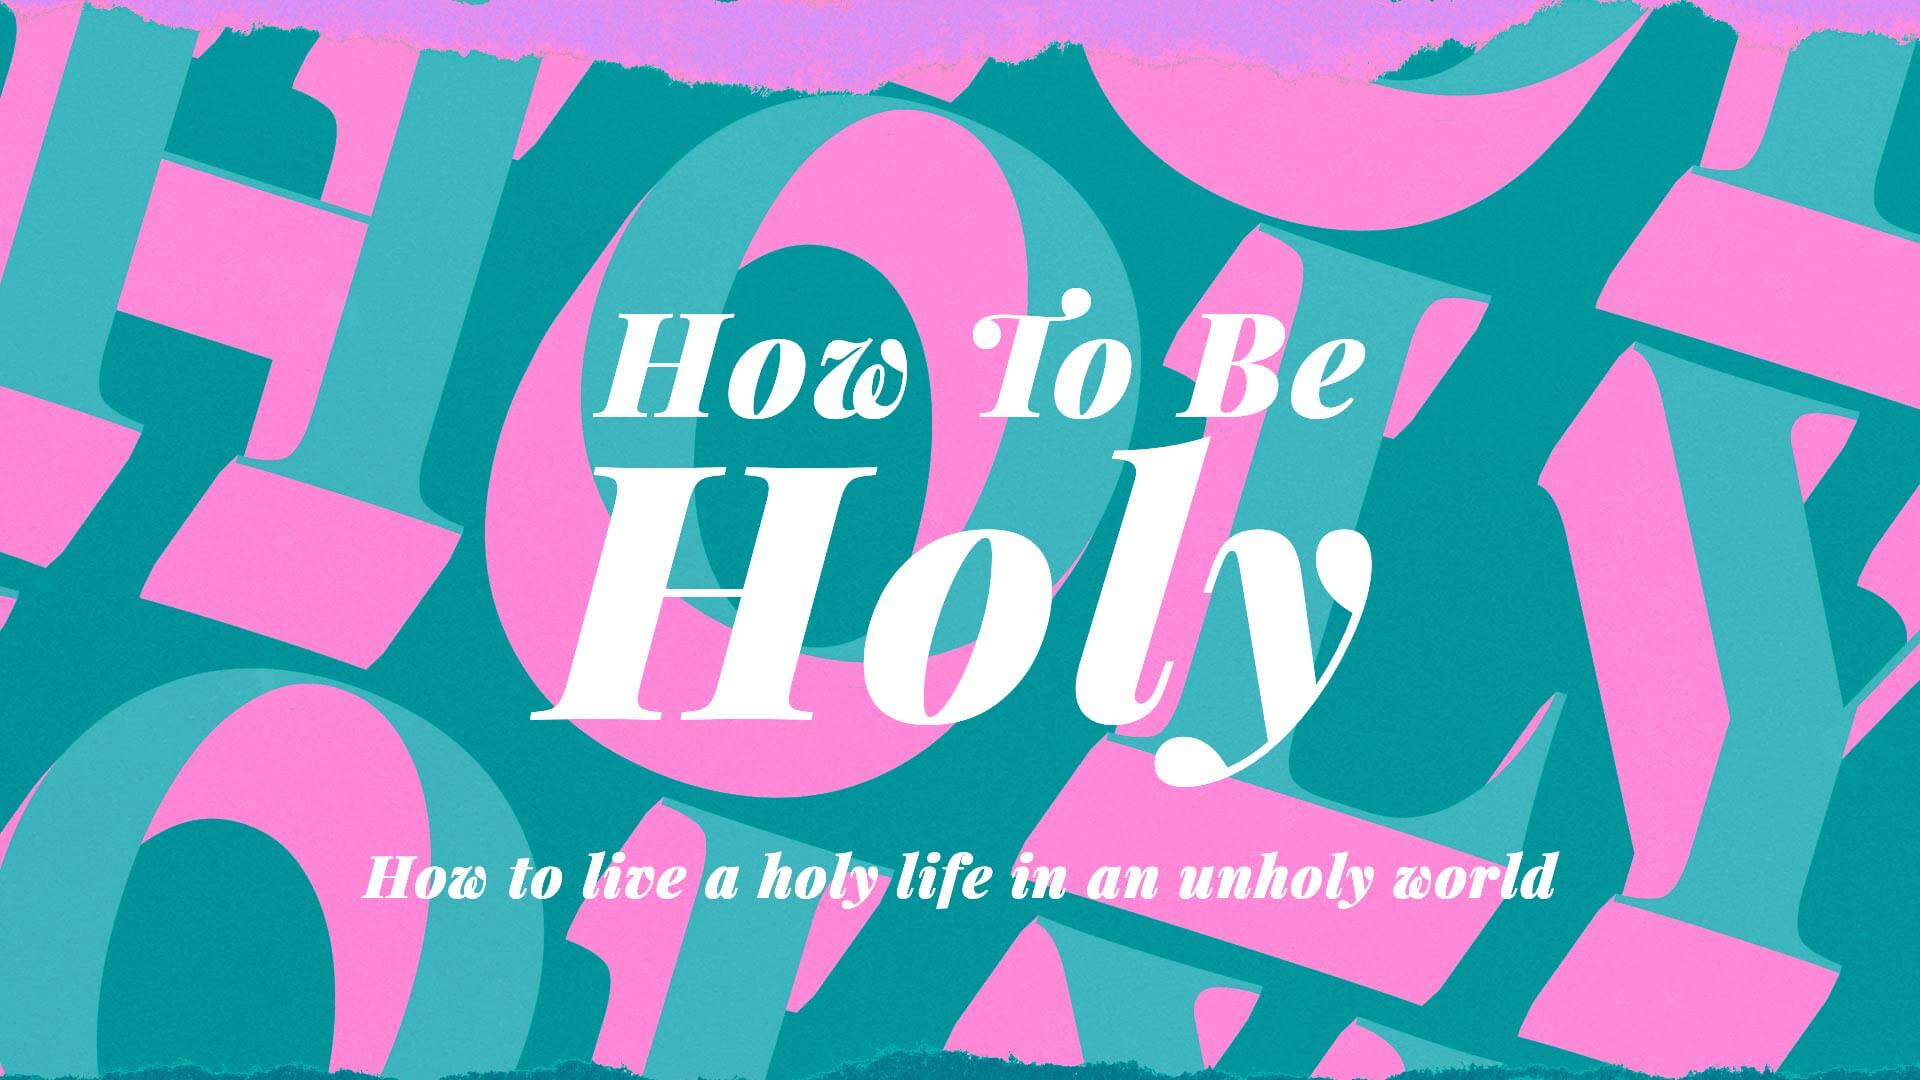 Holy to Be Holy